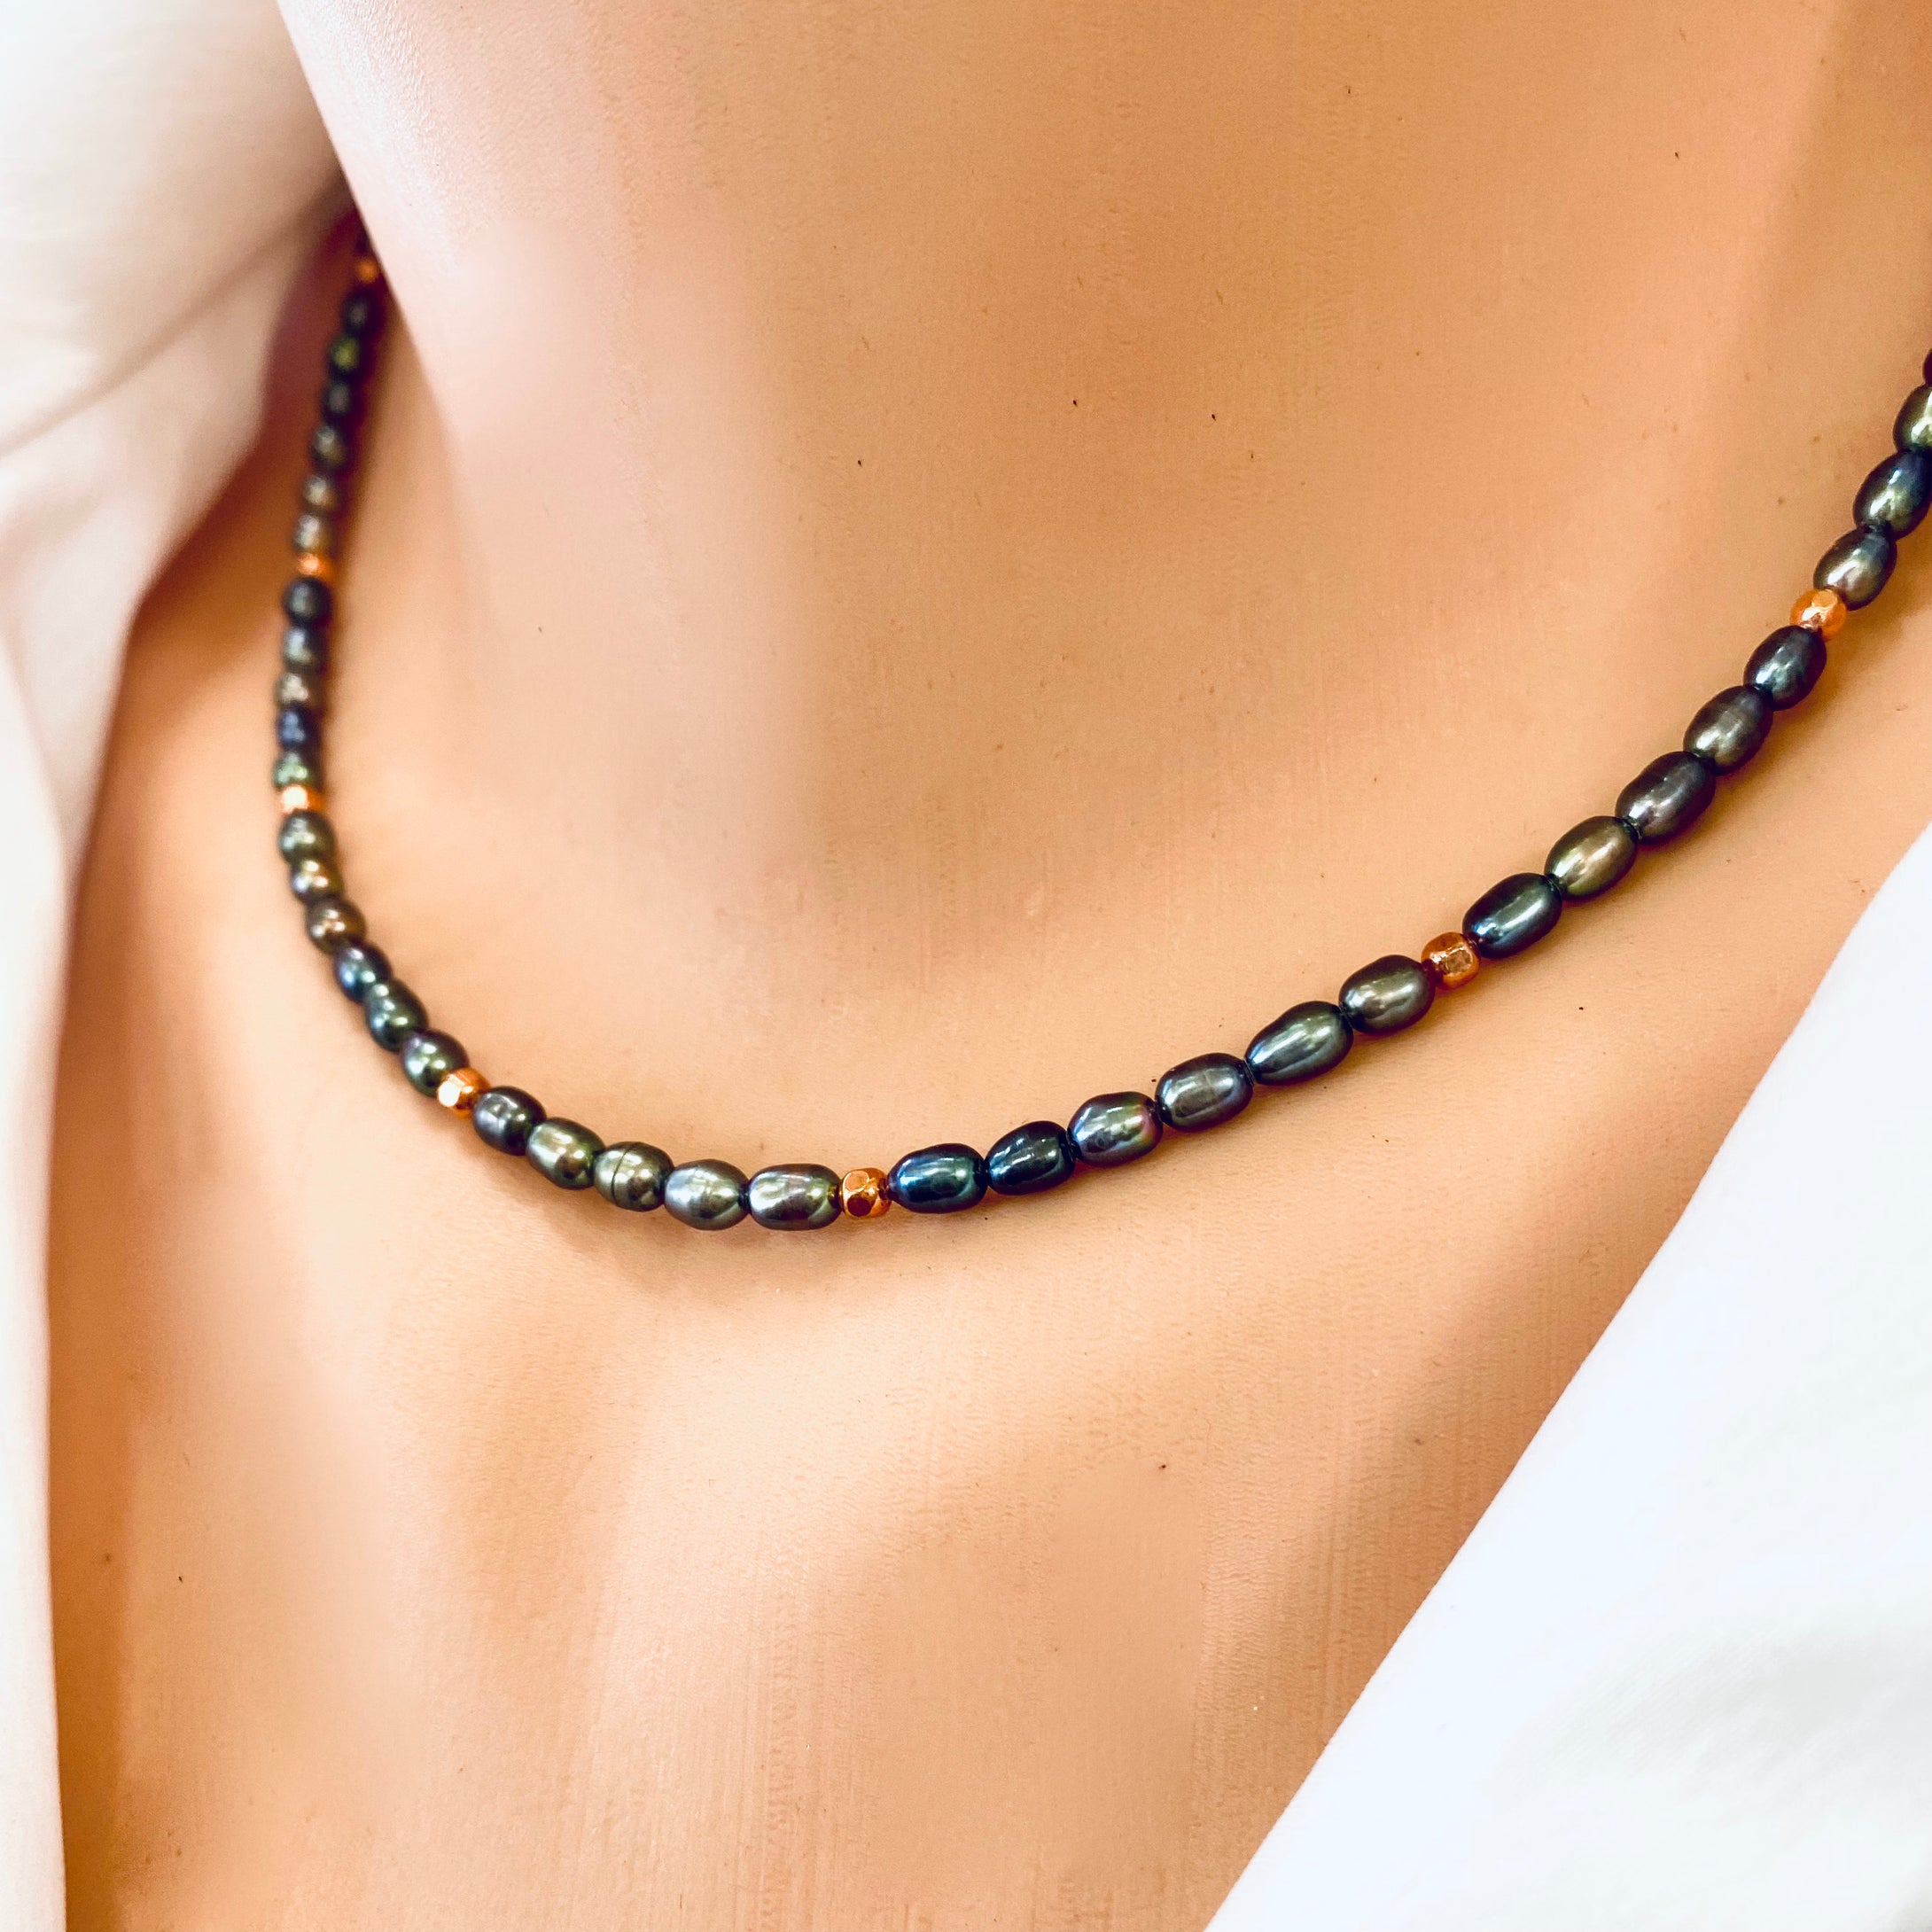 Black Mini Rice pearl Necklace w Solid Copper Beads & Rose Gold Filled Closure, 14.5 to 19